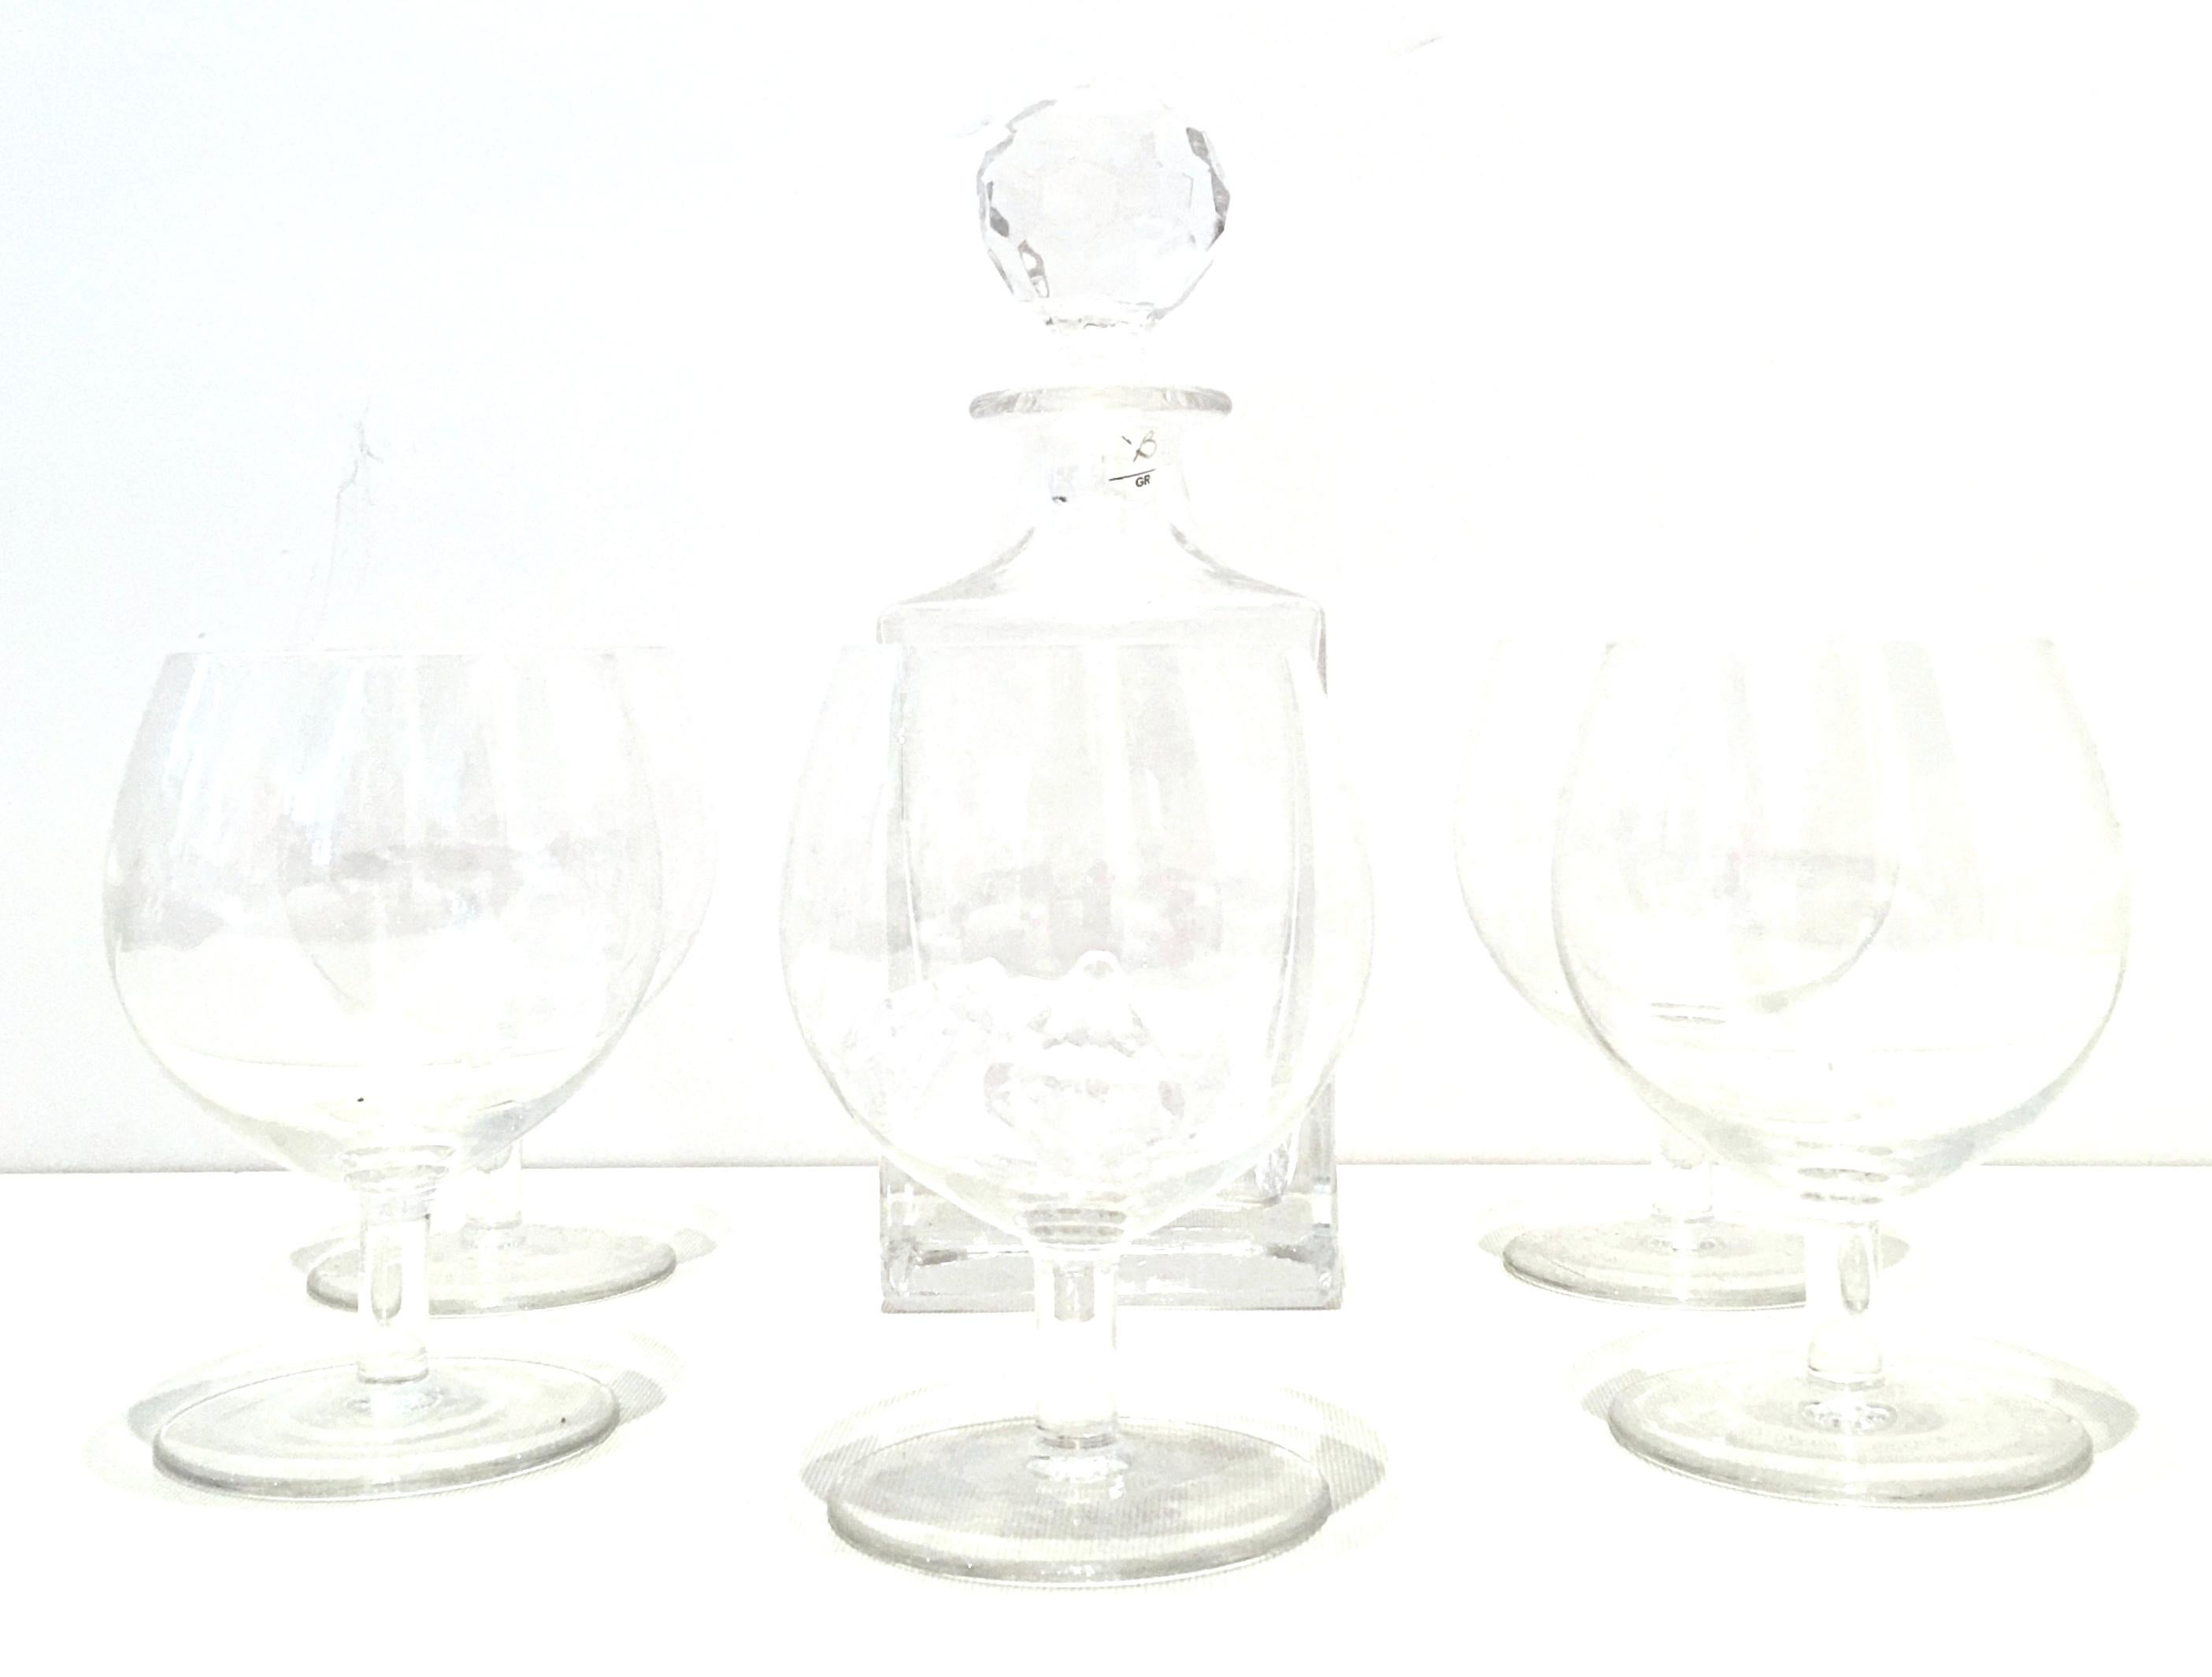 20th century cut crystal liquor decanter and crystal stem drink glasses by, Tiffany & Co. and Riedel. This six-piece set includes one Tiffany & Co. liquor decanter with stopper and five crystal stem drink glasses by, Riedel. Each piece is